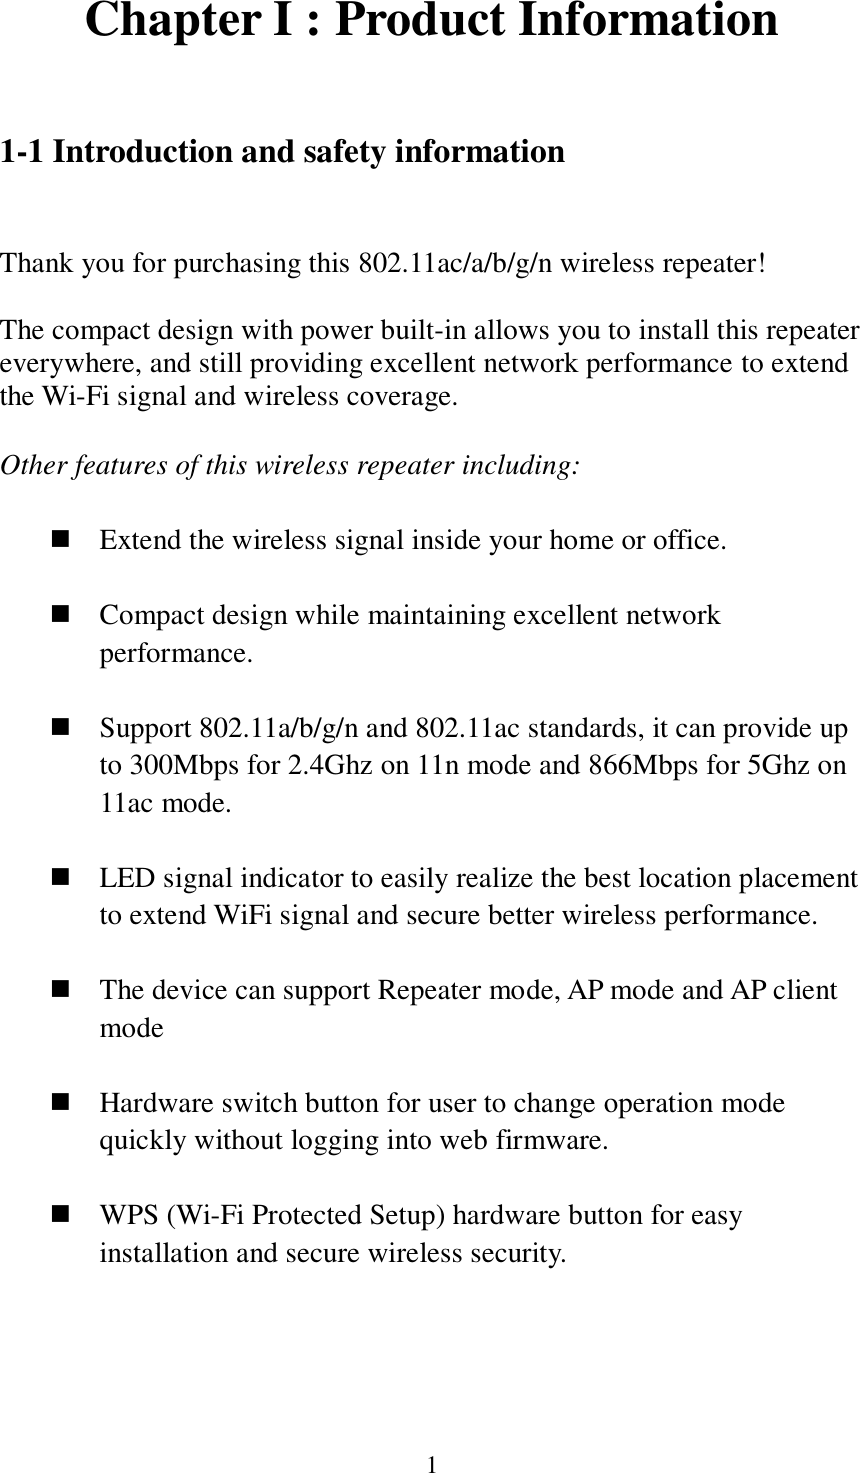 1 Chapter I : Product Information  1-1 Introduction and safety information  Thank you for purchasing this 802.11ac/a/b/g/n wireless repeater!  The compact design with power built-in allows you to install this repeater everywhere, and still providing excellent network performance to extend the Wi-Fi signal and wireless coverage.    Other features of this wireless repeater including:   Extend the wireless signal inside your home or office.   Compact design while maintaining excellent network performance.   Support 802.11a/b/g/n and 802.11ac standards, it can provide up to 300Mbps for 2.4Ghz on 11n mode and 866Mbps for 5Ghz on 11ac mode.   LED signal indicator to easily realize the best location placement to extend WiFi signal and secure better wireless performance.       The device can support Repeater mode, AP mode and AP client mode   Hardware switch button for user to change operation mode quickly without logging into web firmware.   WPS (Wi-Fi Protected Setup) hardware button for easy installation and secure wireless security.    